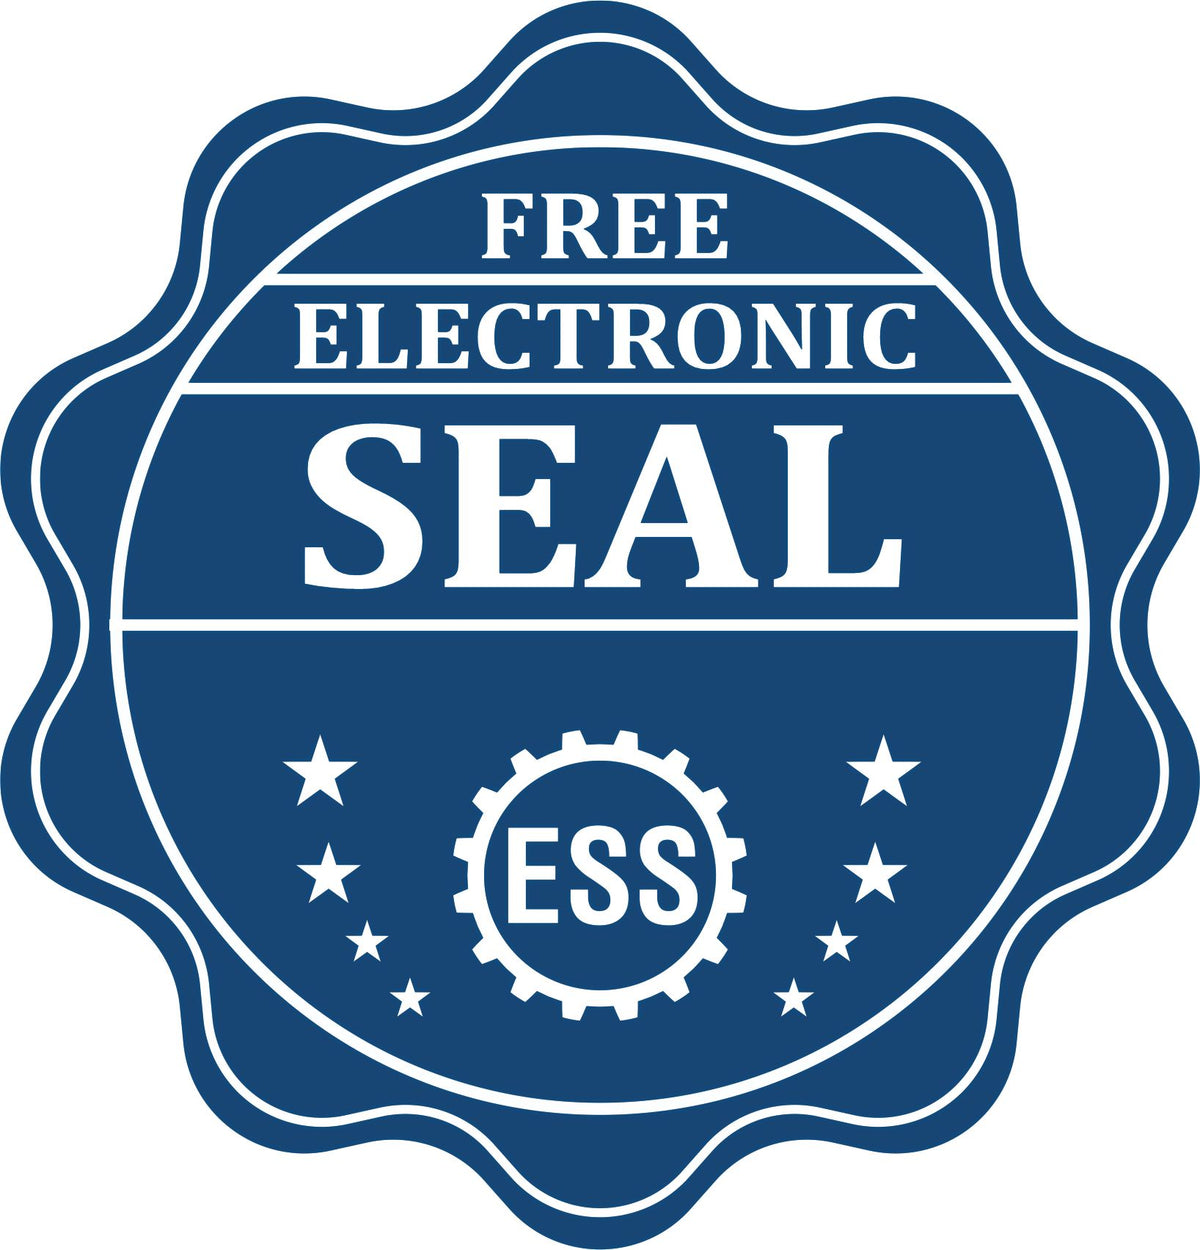 A badge showing a free electronic seal for the Heavy-Duty Maryland Rectangular Notary Stamp with stars and the ESS gear on the emblem.